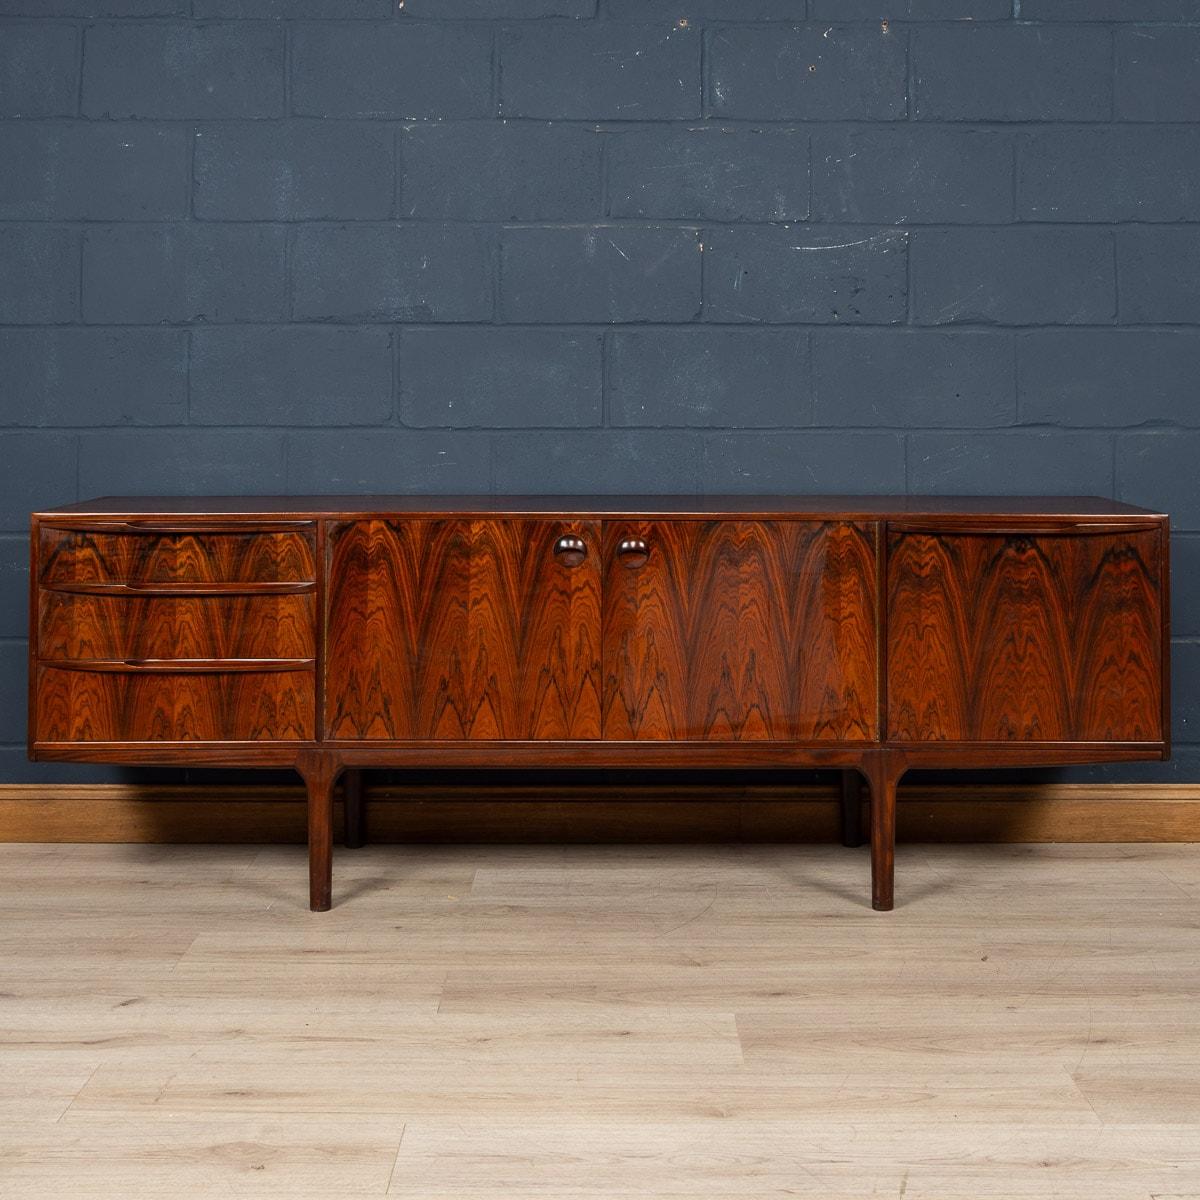 A beautifully designed rosewood ‘Dunvegan’ sideboard designed by Tom Robertson, manufactured by A.H. McIntosh of Kirkcaldy, Scotland. Dating from the 1960s, it was the flagship piece from the Danish-inspired Dunvegan collection. This very